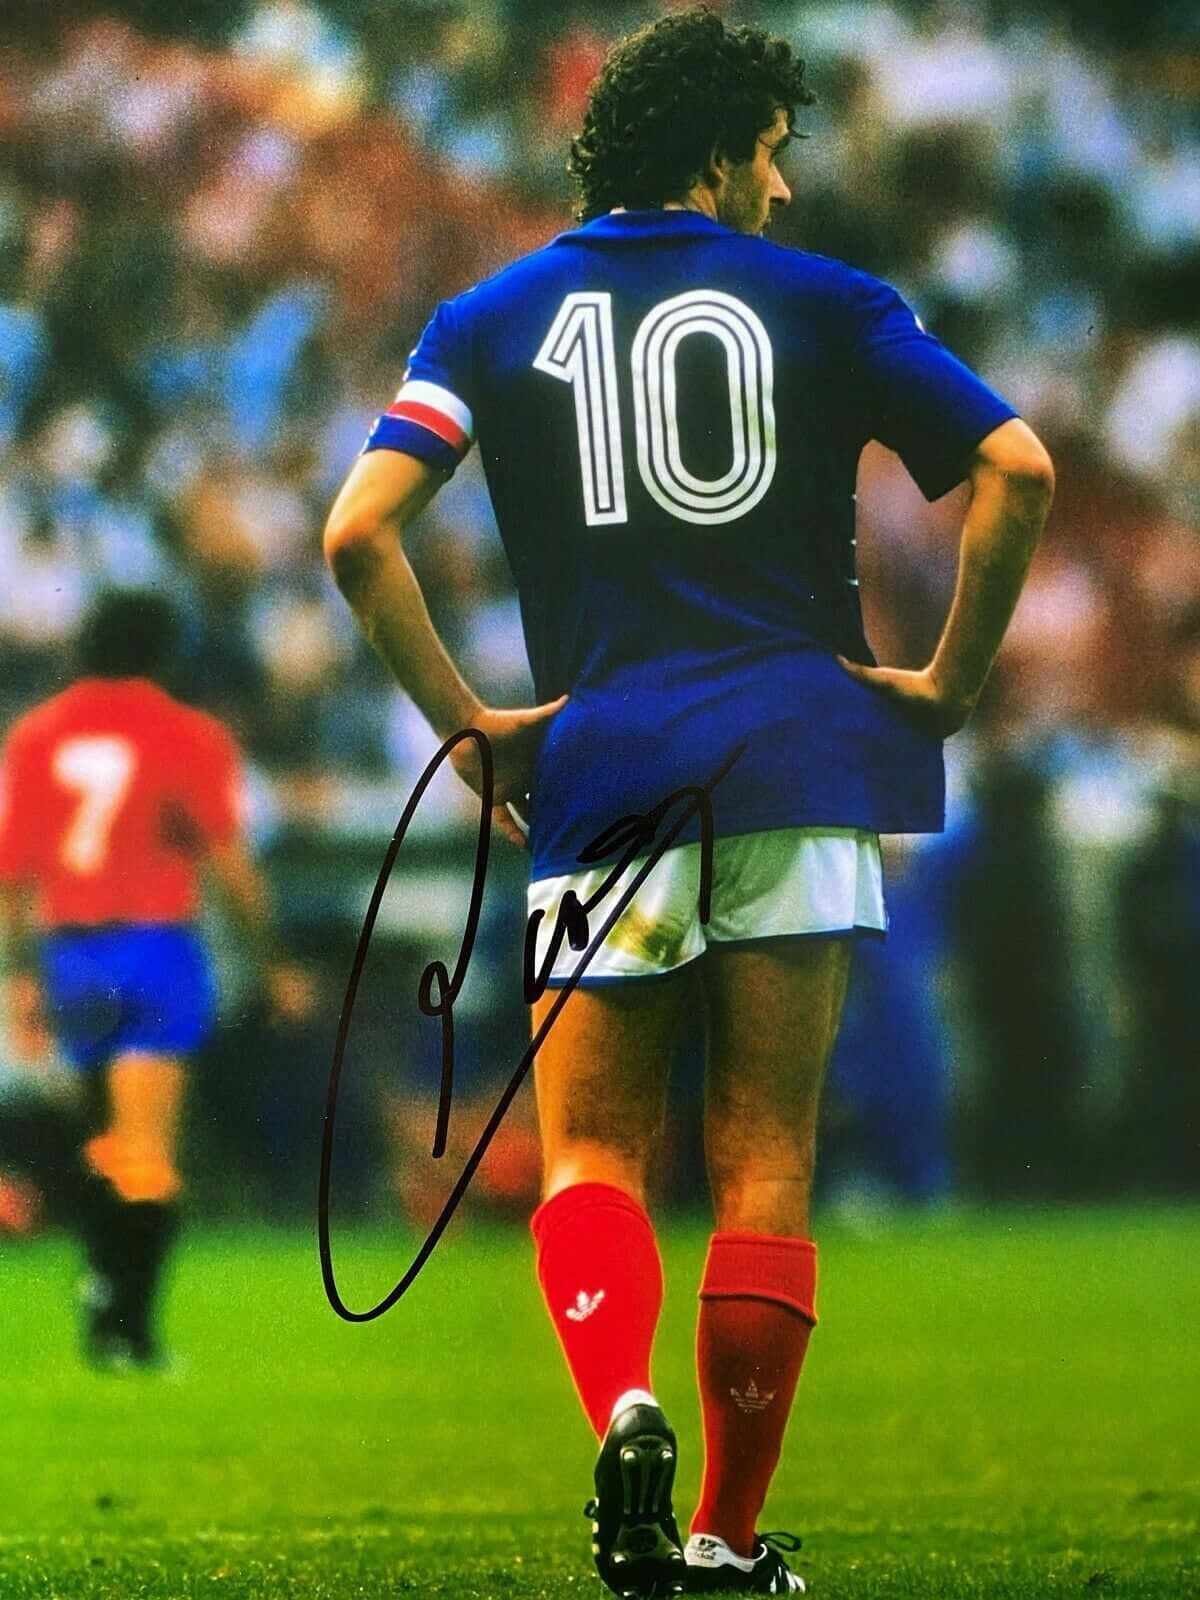 Michel Platini 10 Football Autographed Photography Wallpaper